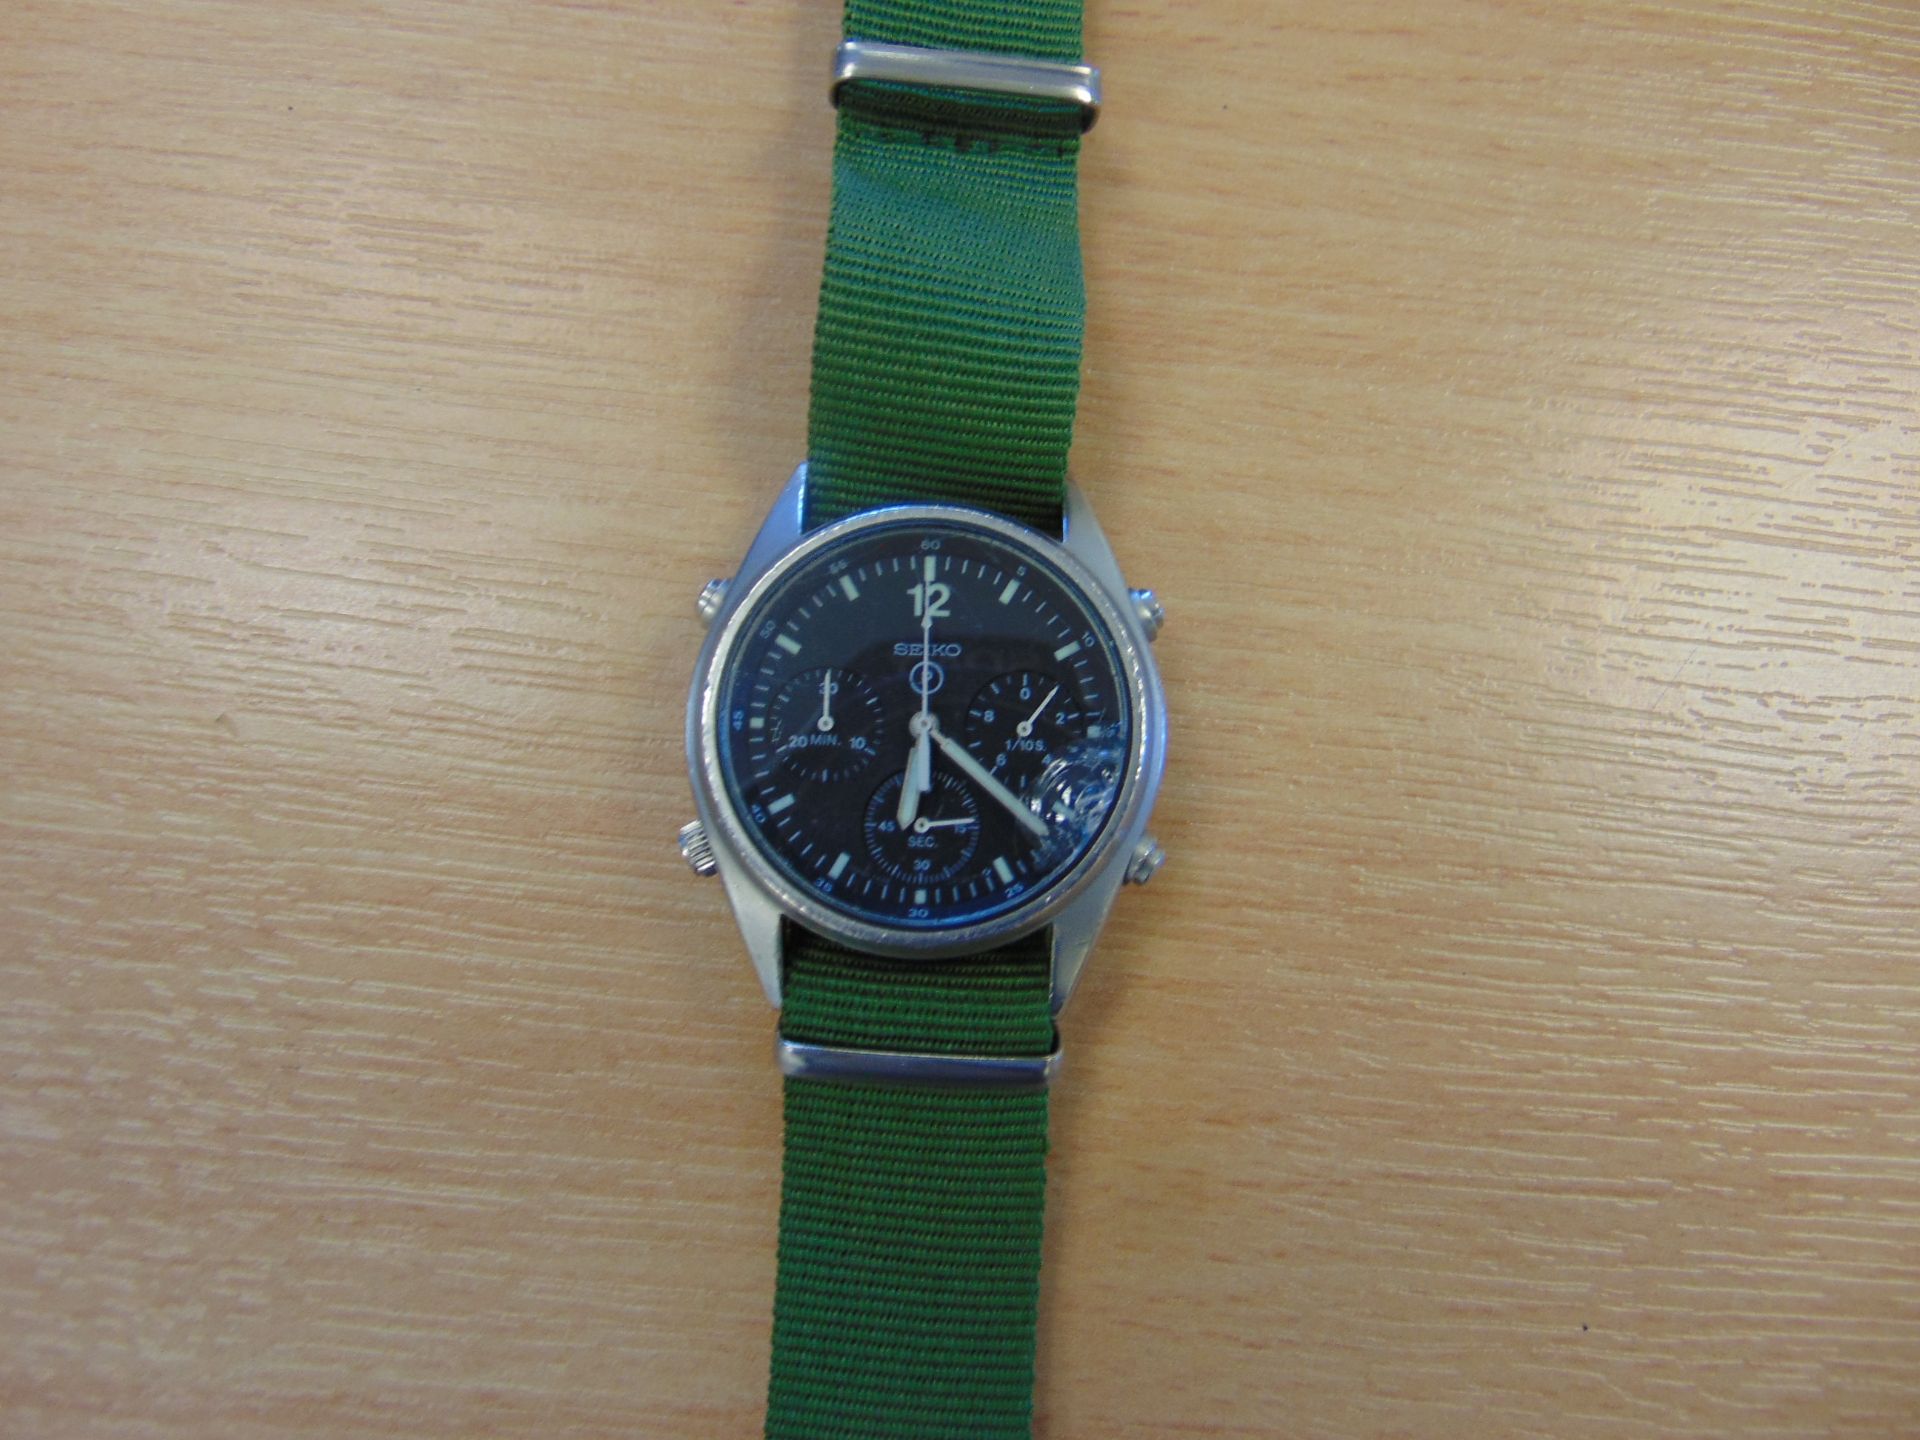 Seiko Gen 1 Pilots Chrono RAF Harrier Force Issue with Nato Marks, Date 1989 - Image 2 of 6